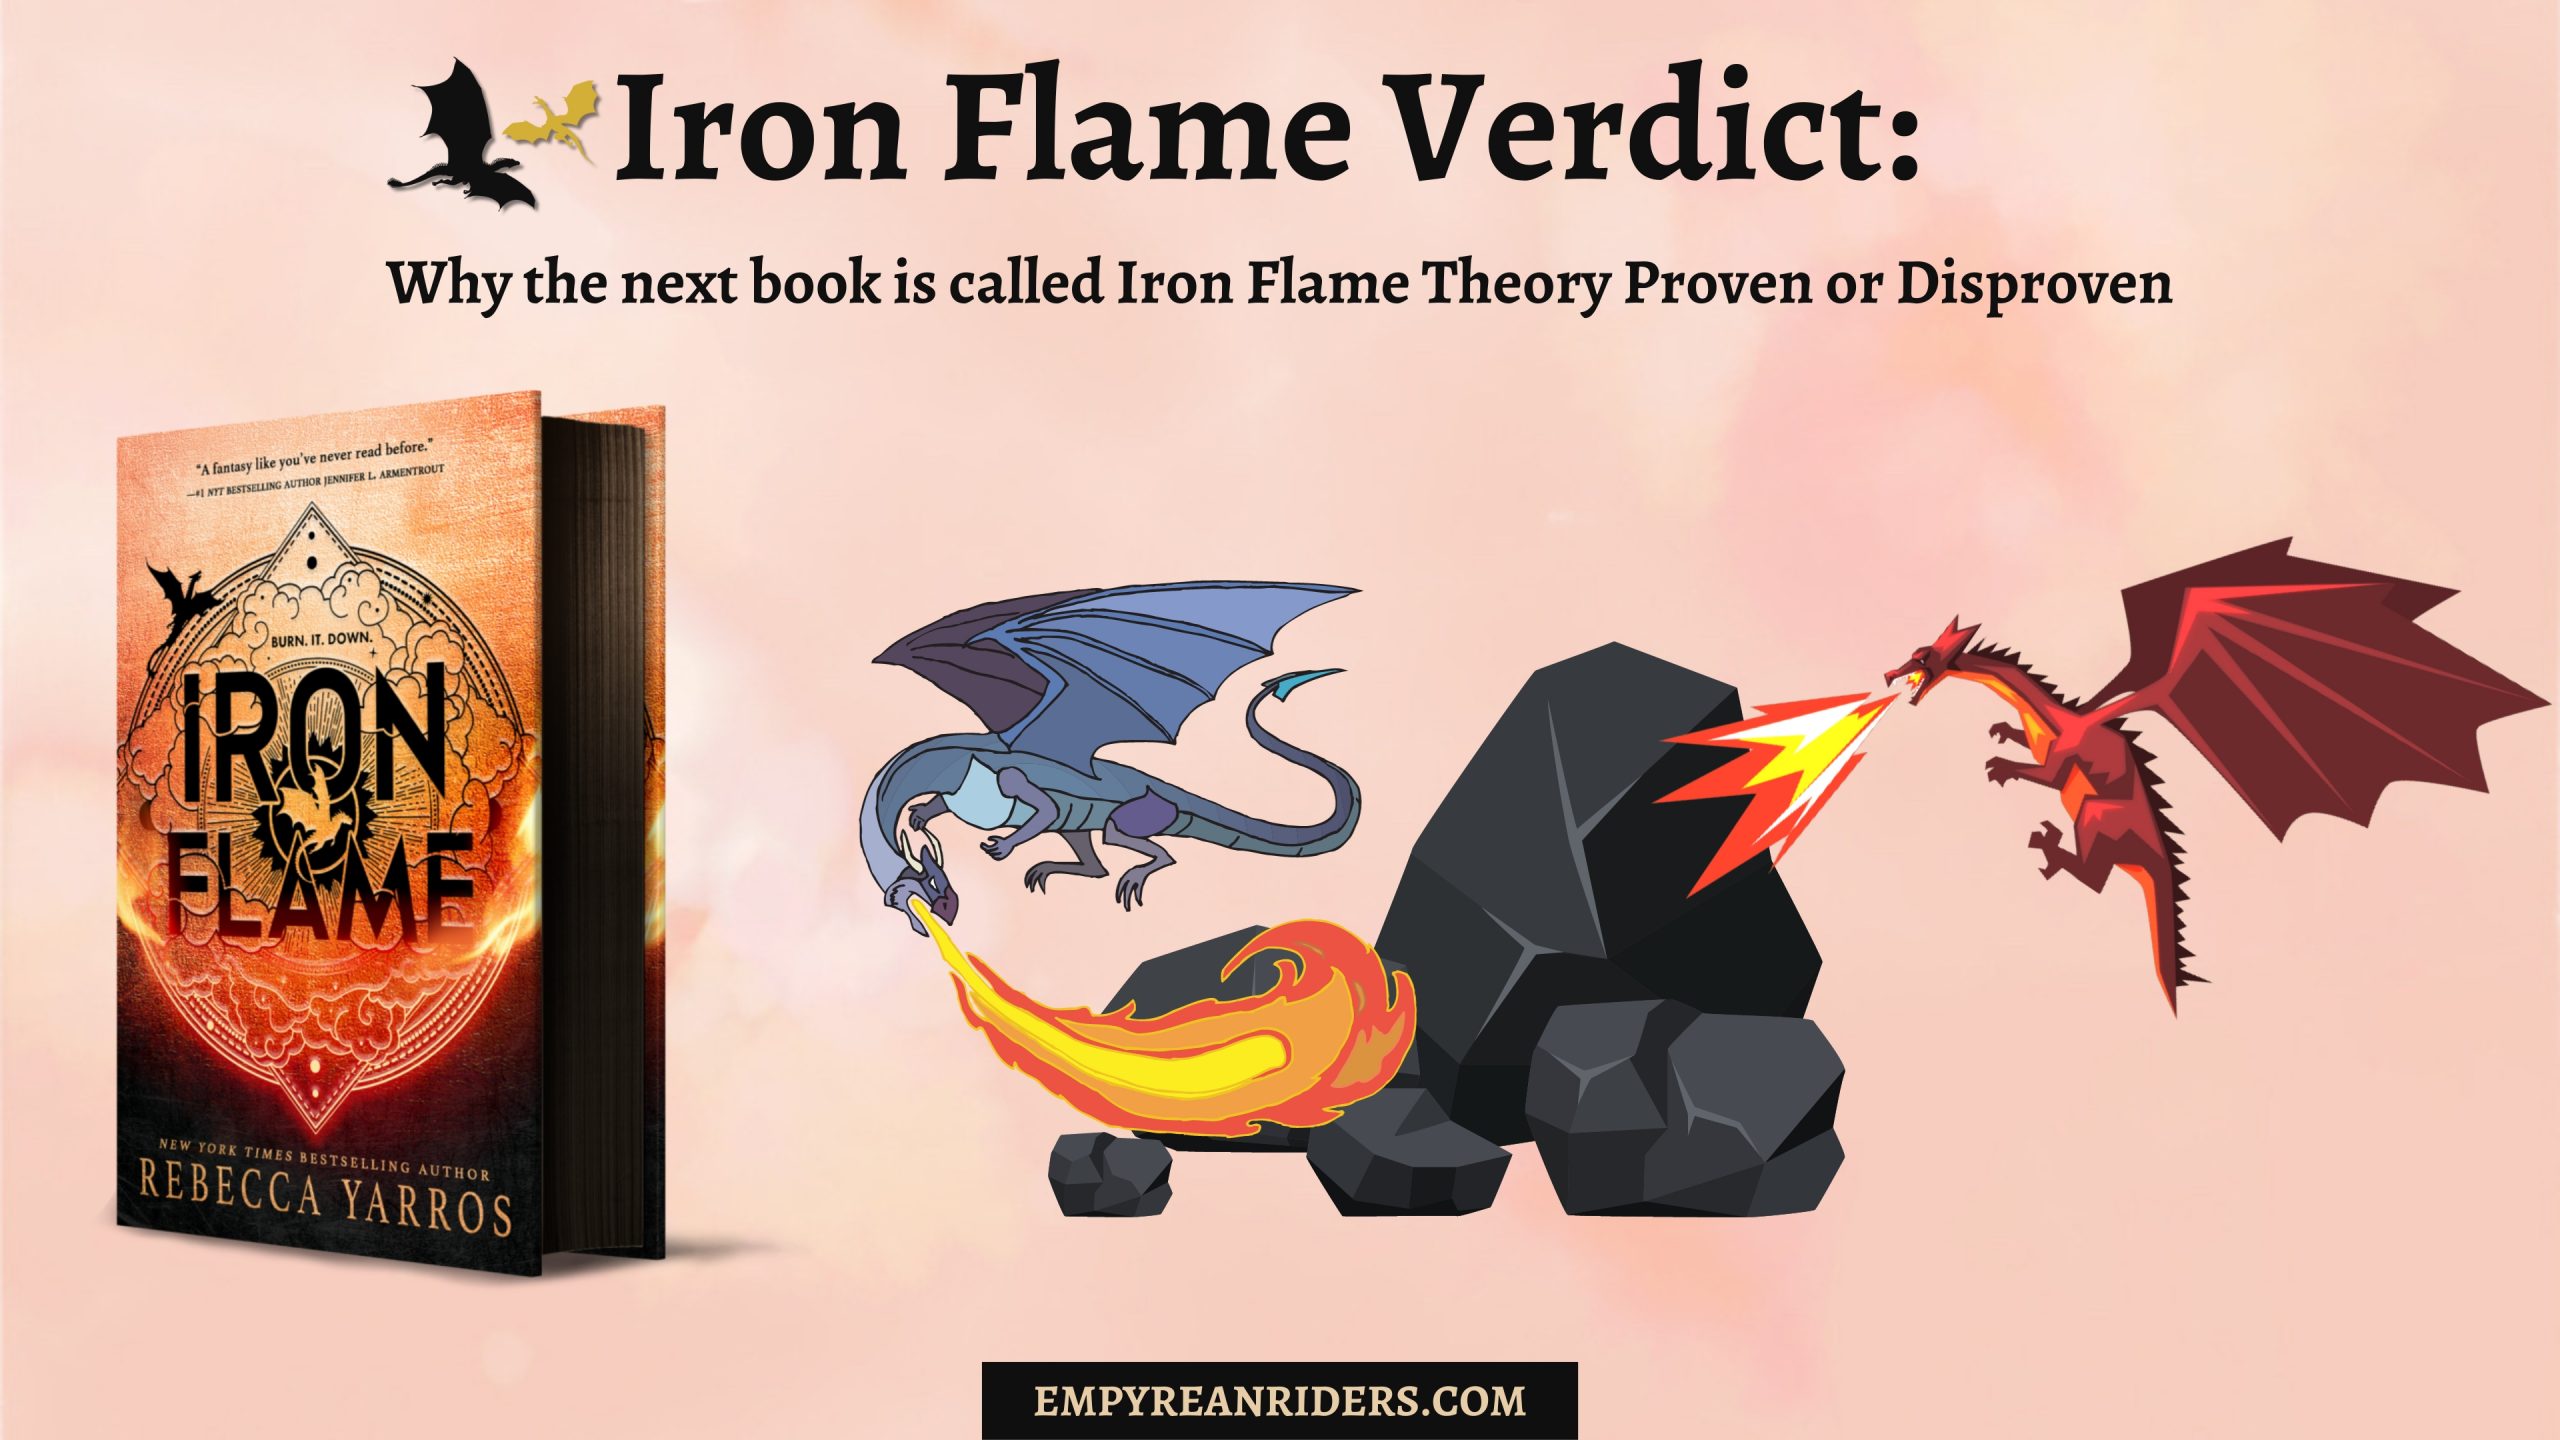 Iron Flame Verdict: Why the next book is called Iron Flame Theory